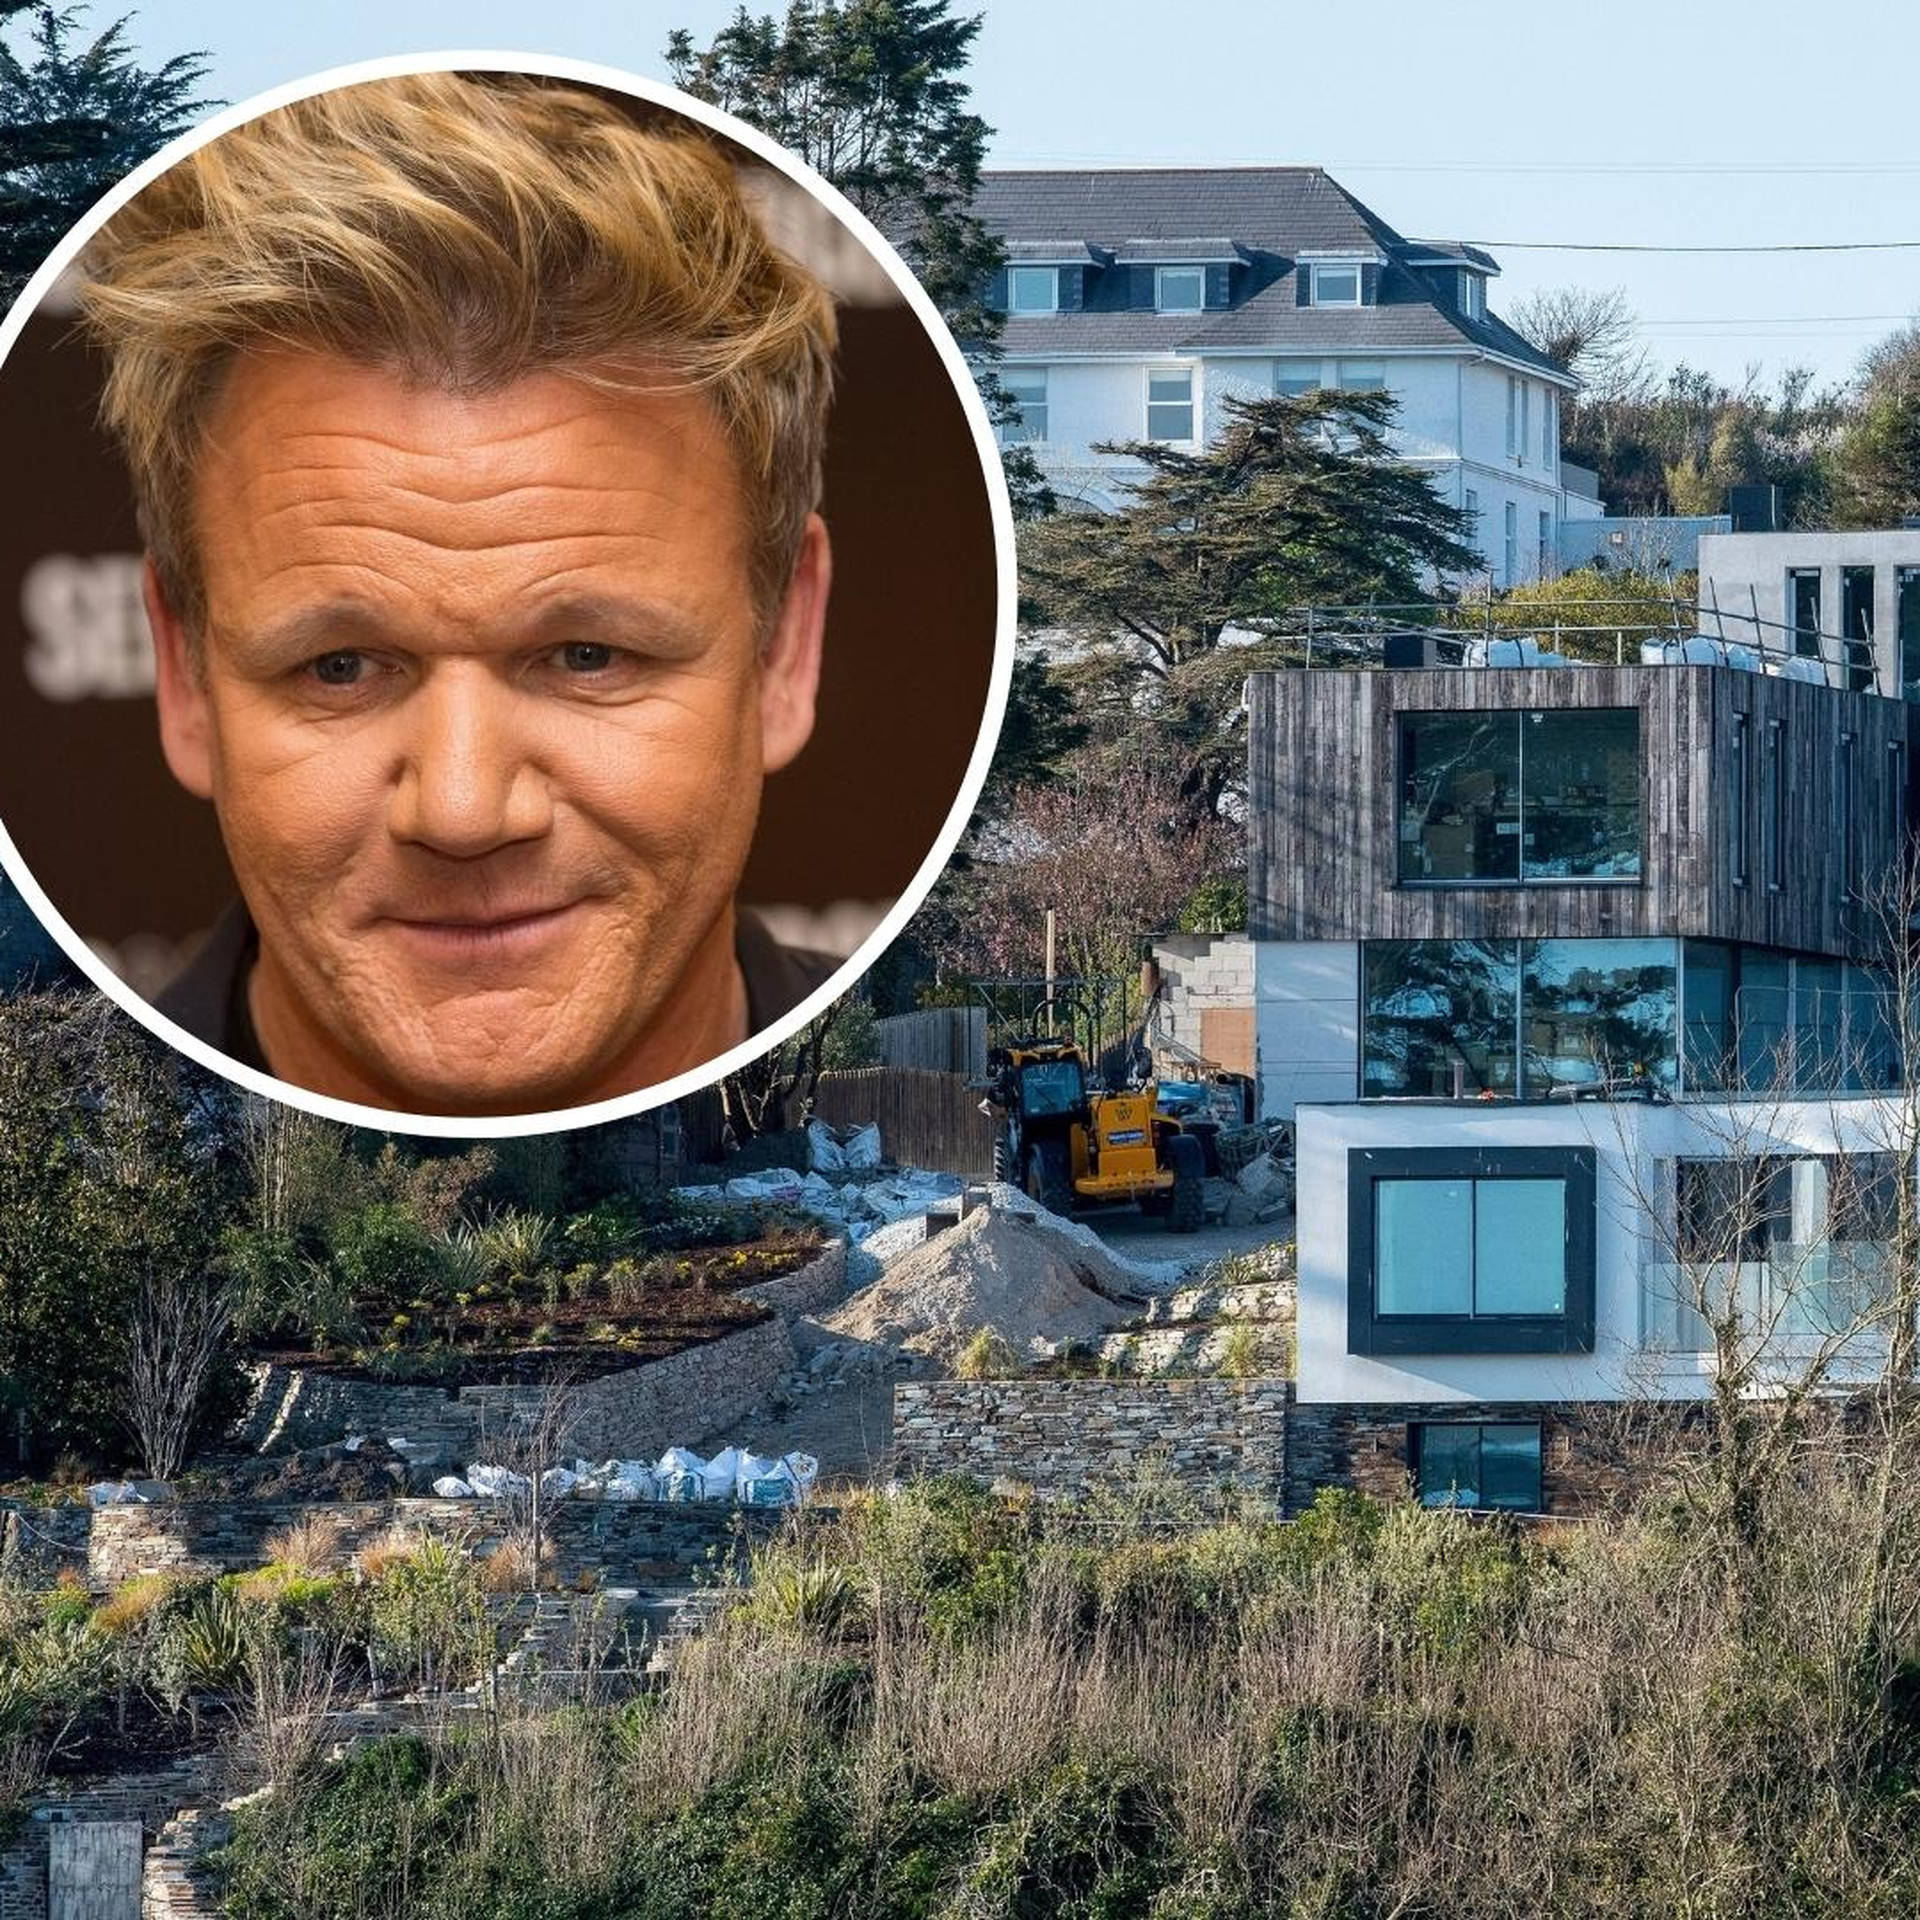 Gordon Ramsay reignites feud after saying he 'cant stand' the Cornish - LBC